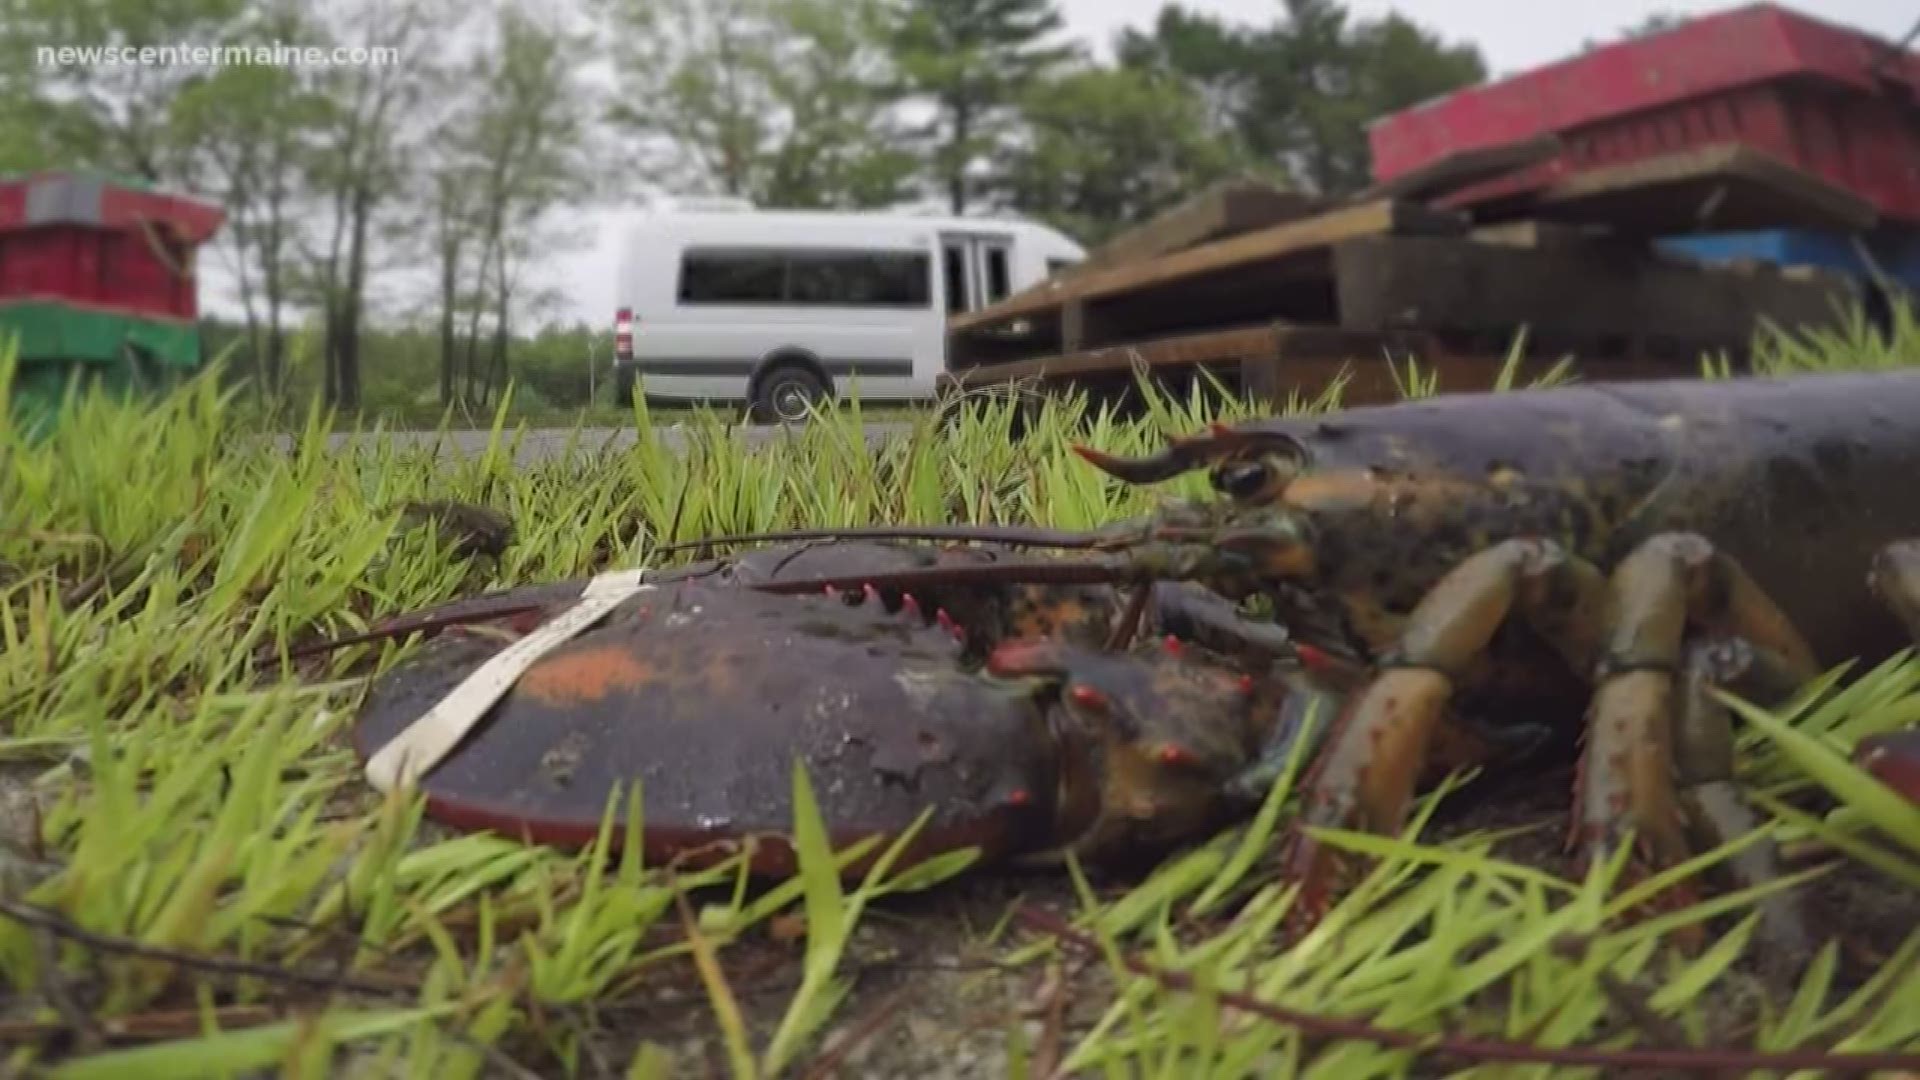 Load of live lobsters dumped on Route 1